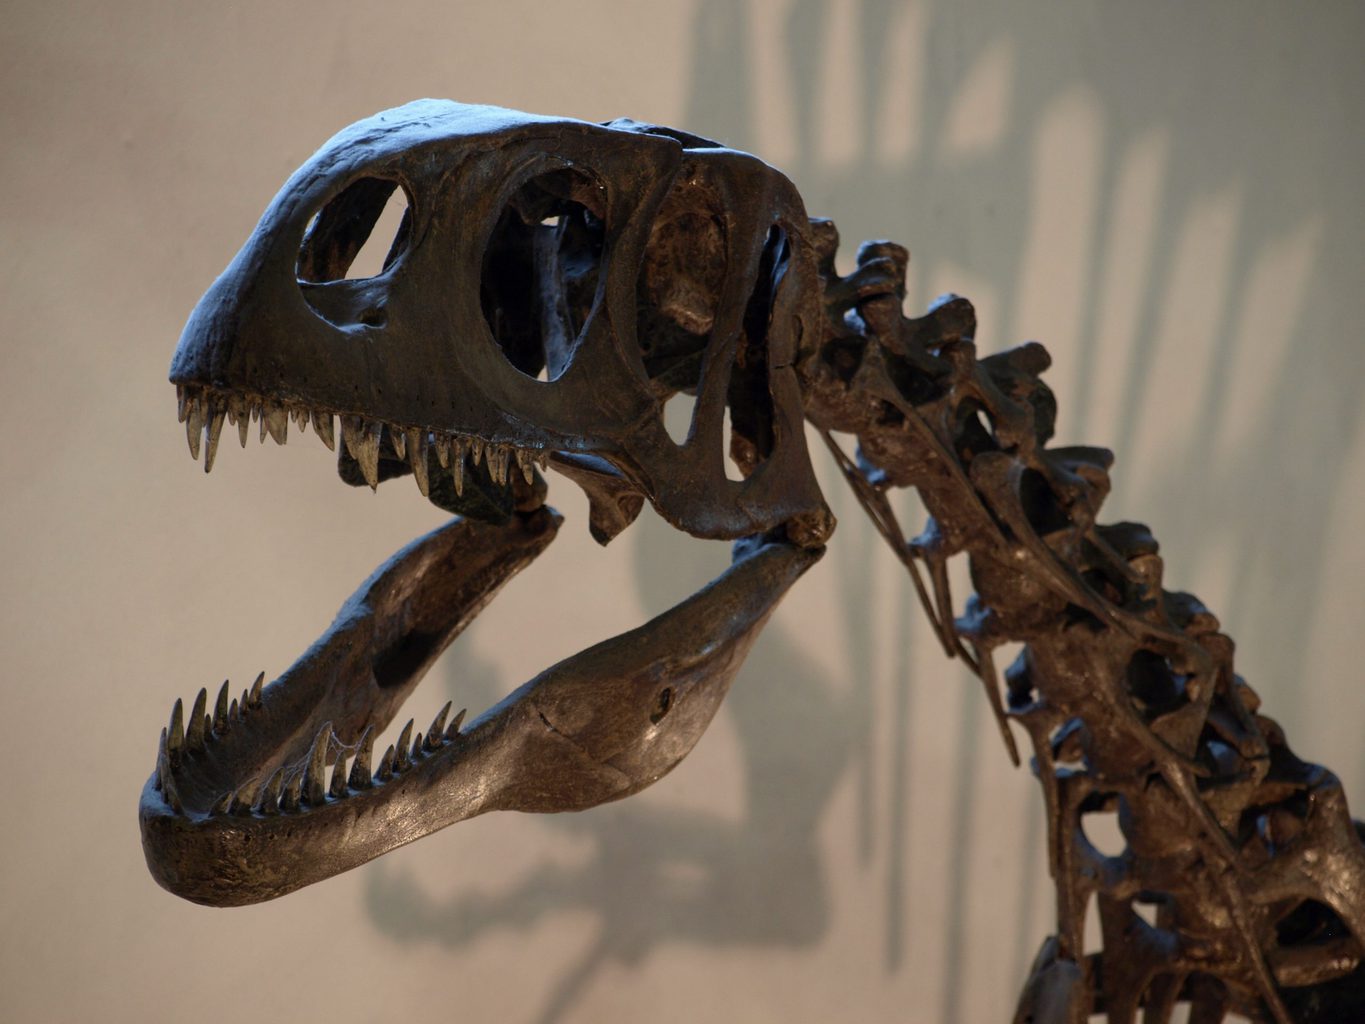 Close up of the head and neck of a dinosaur skeleton with its mouth open showing sharp teeth inside the Dinosaurland Fossil Museum